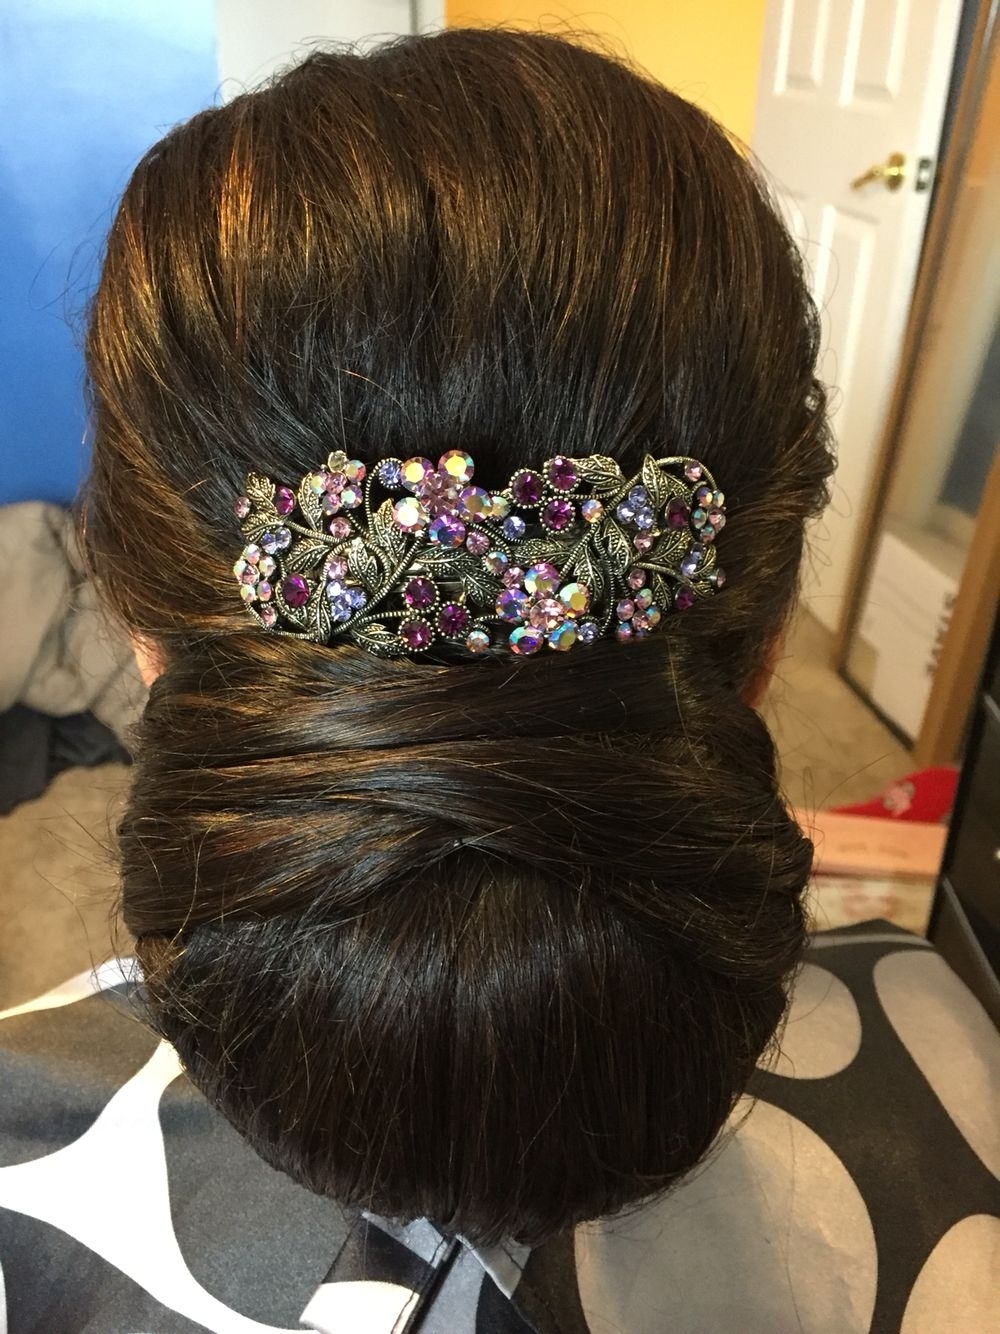 Mother Of The Bride Hairstyle Indian Hairstyle. Low Bun throughout Indian Wedding Hairstyles For Brides Mother